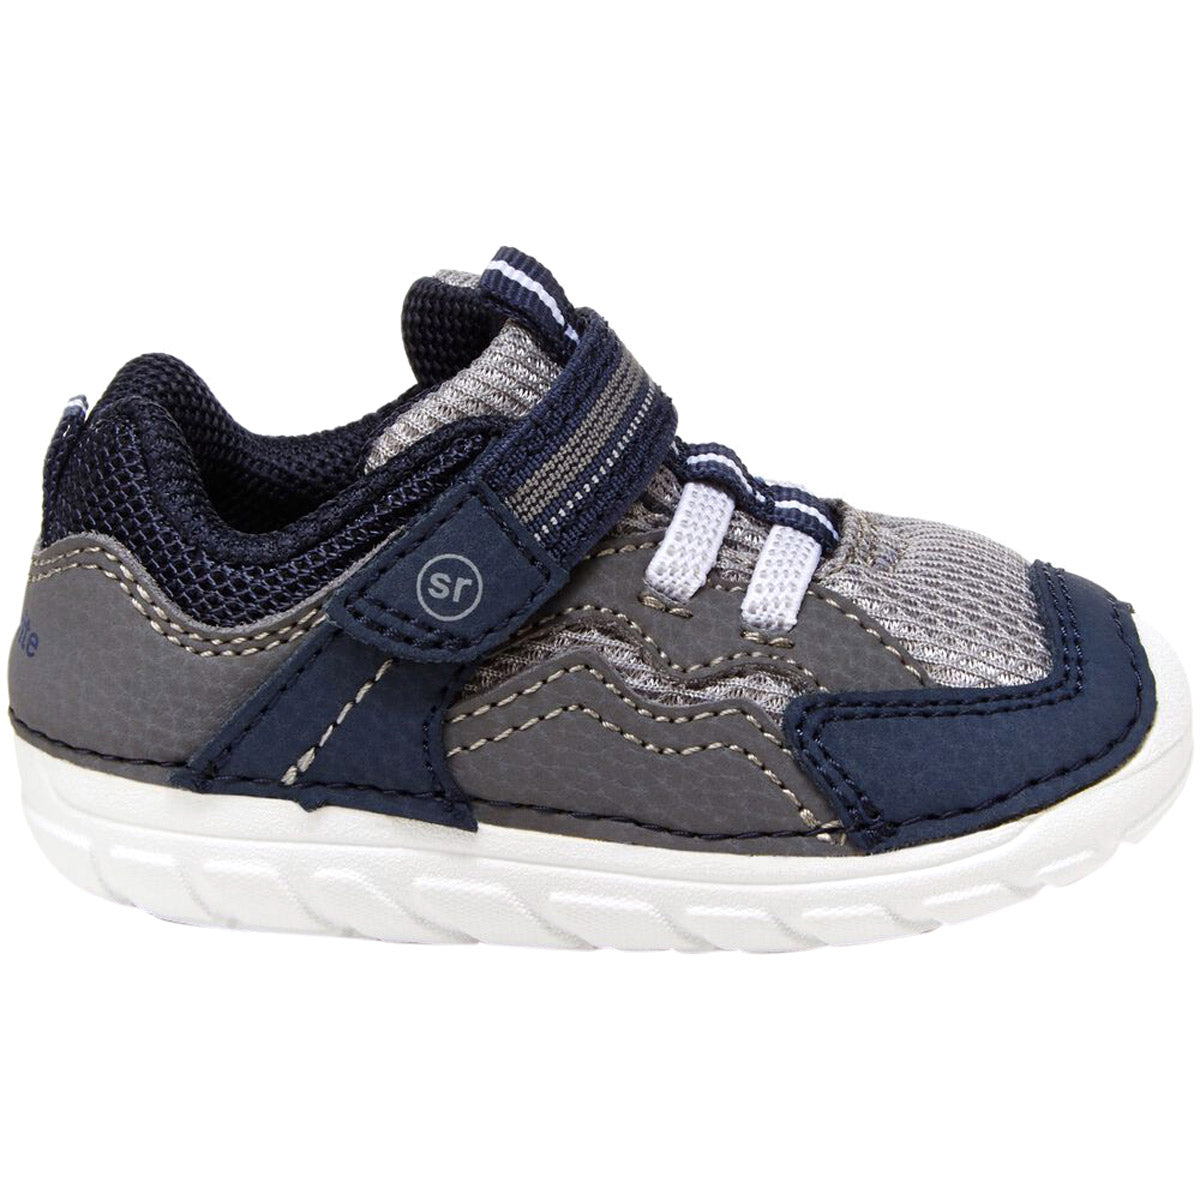 Toddler's Stride Rite navy and gray sneaker with hook and loop closure and slip-resistant.